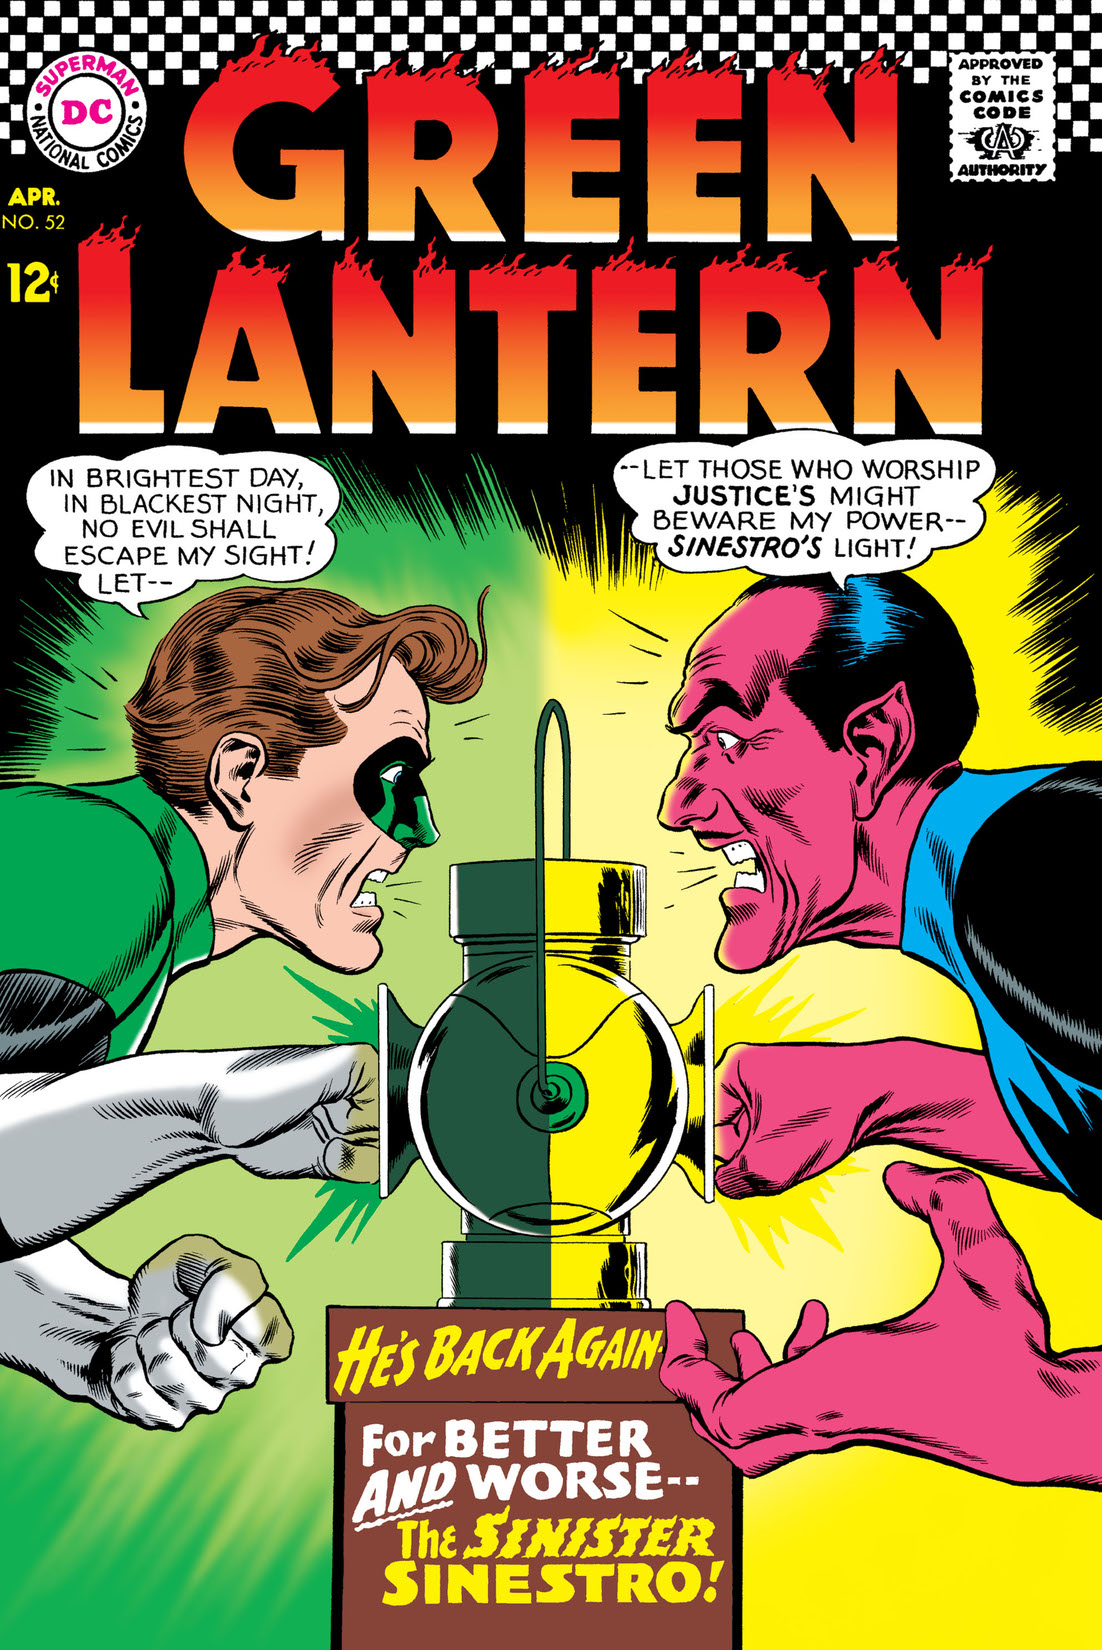 Green Lantern (1960-) #52 preview images